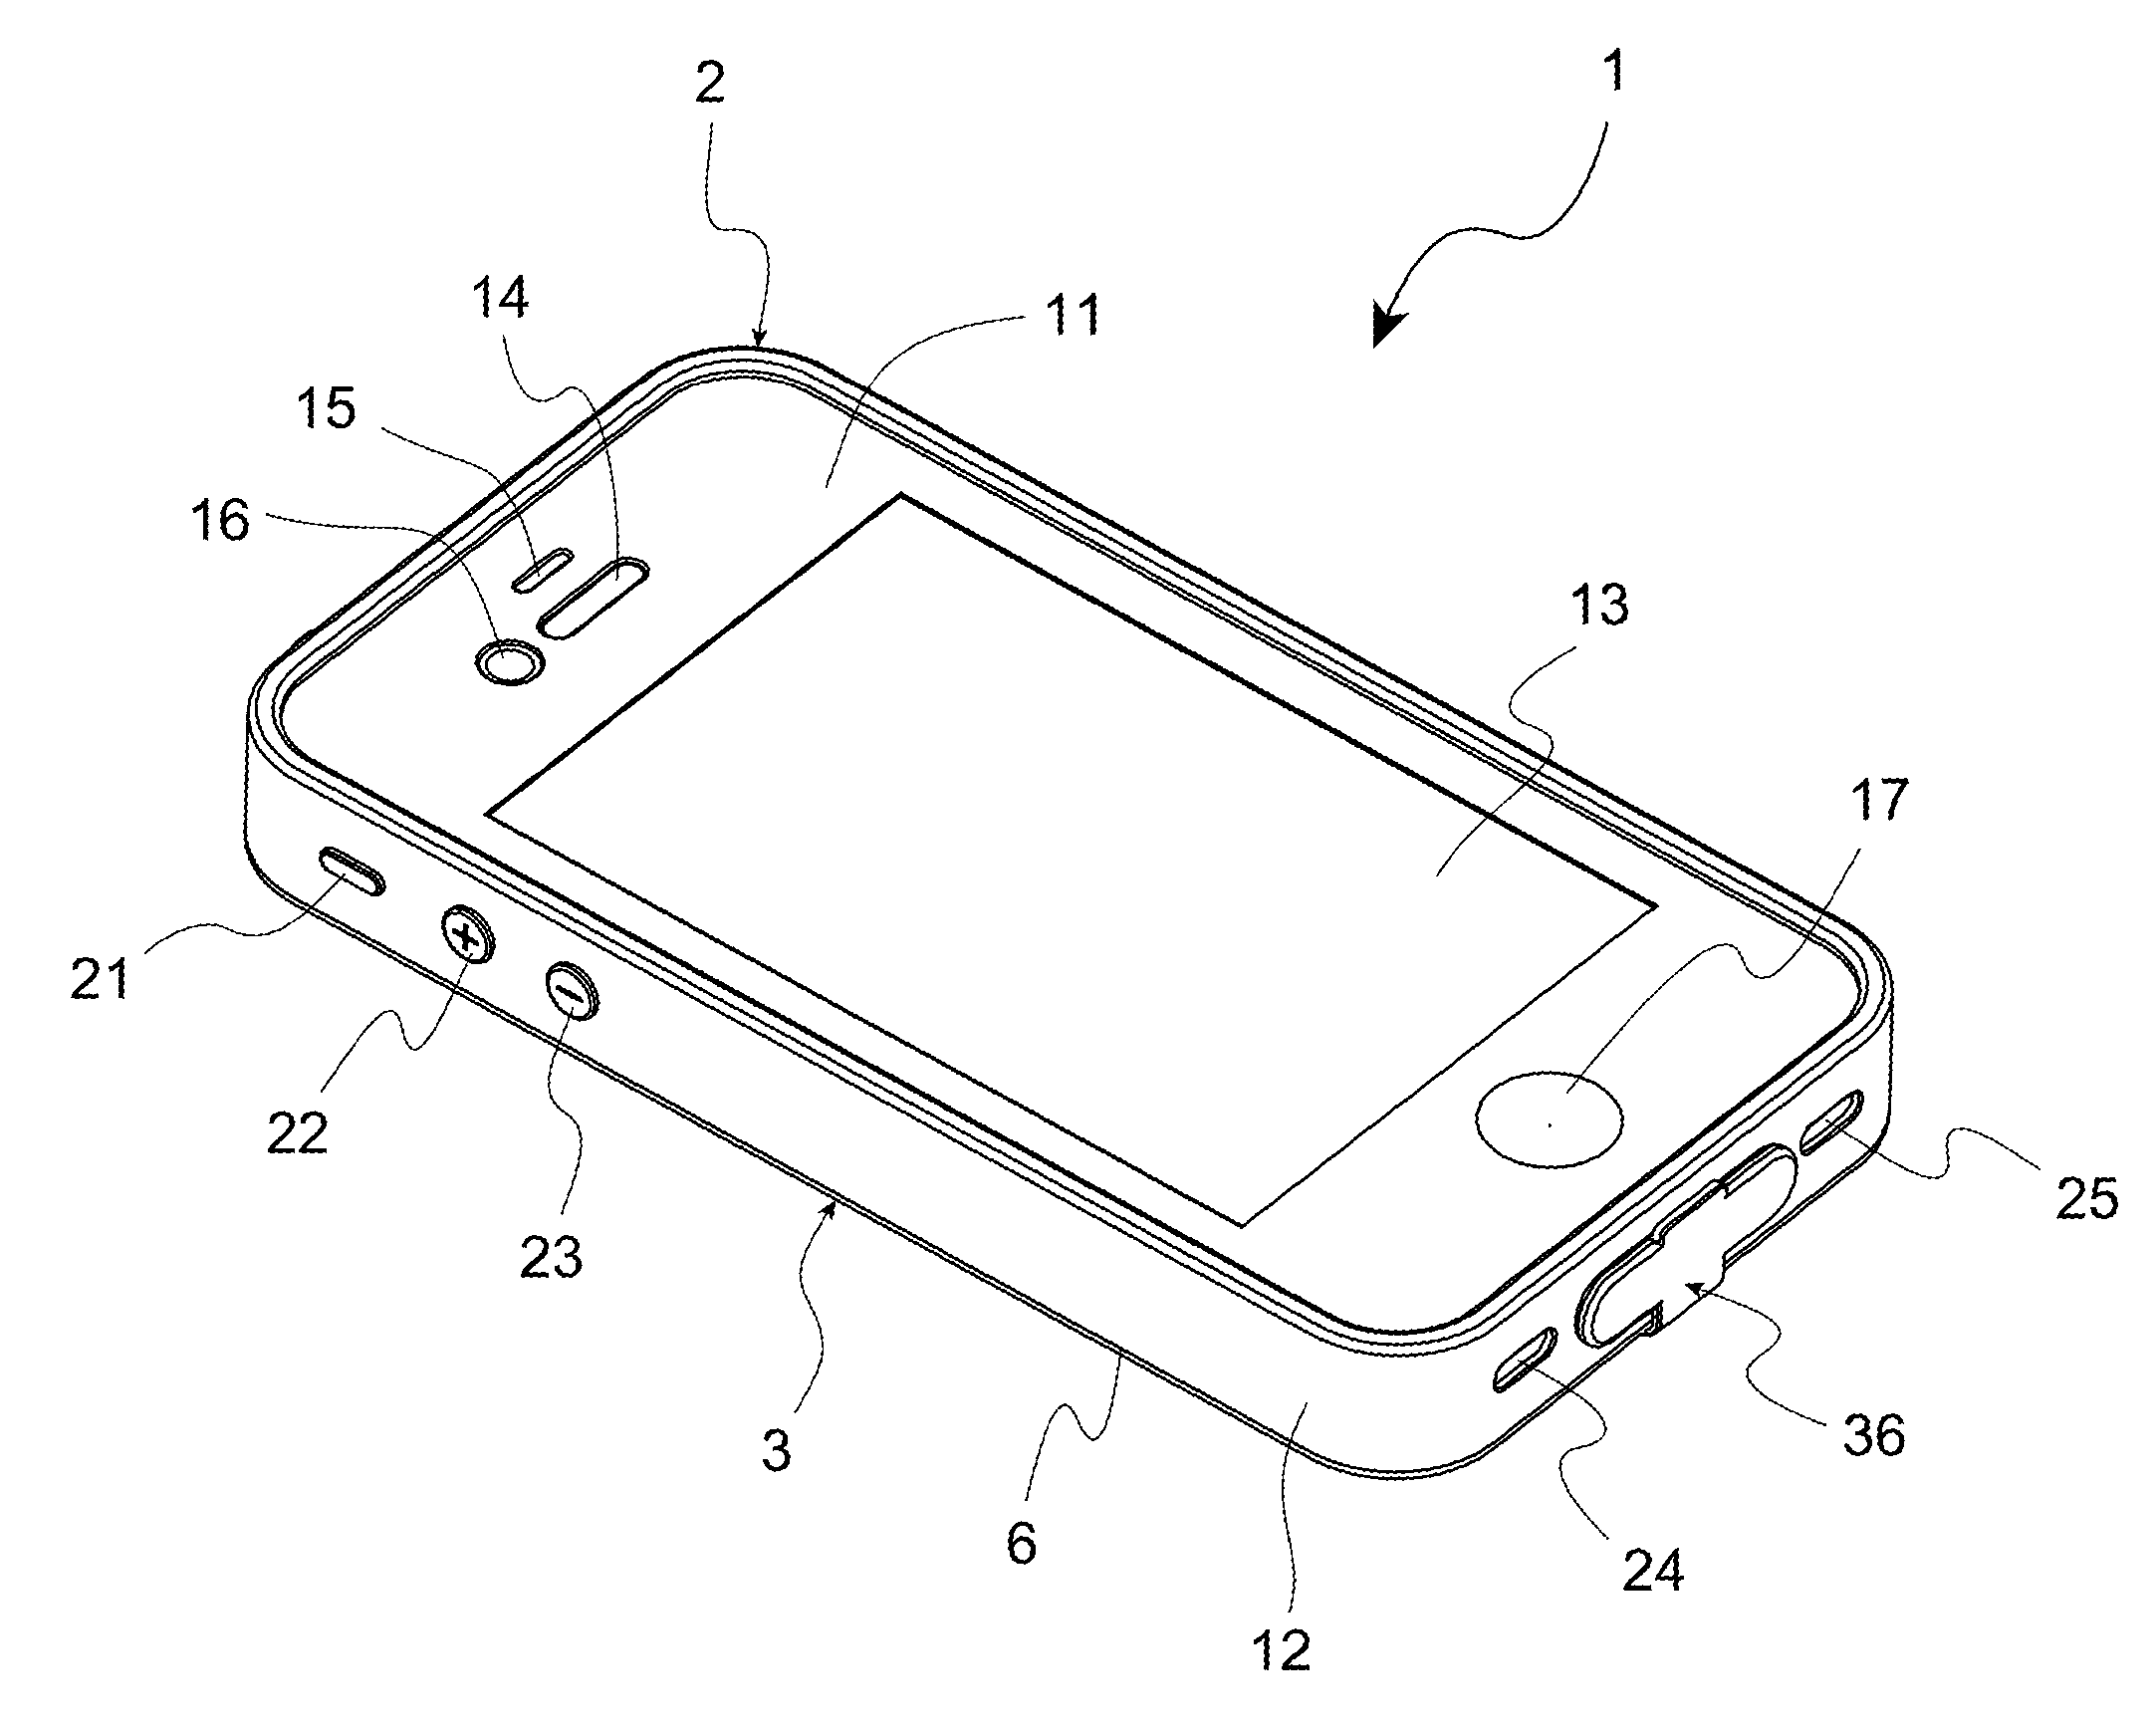 Case for housing and protecting an electronic device